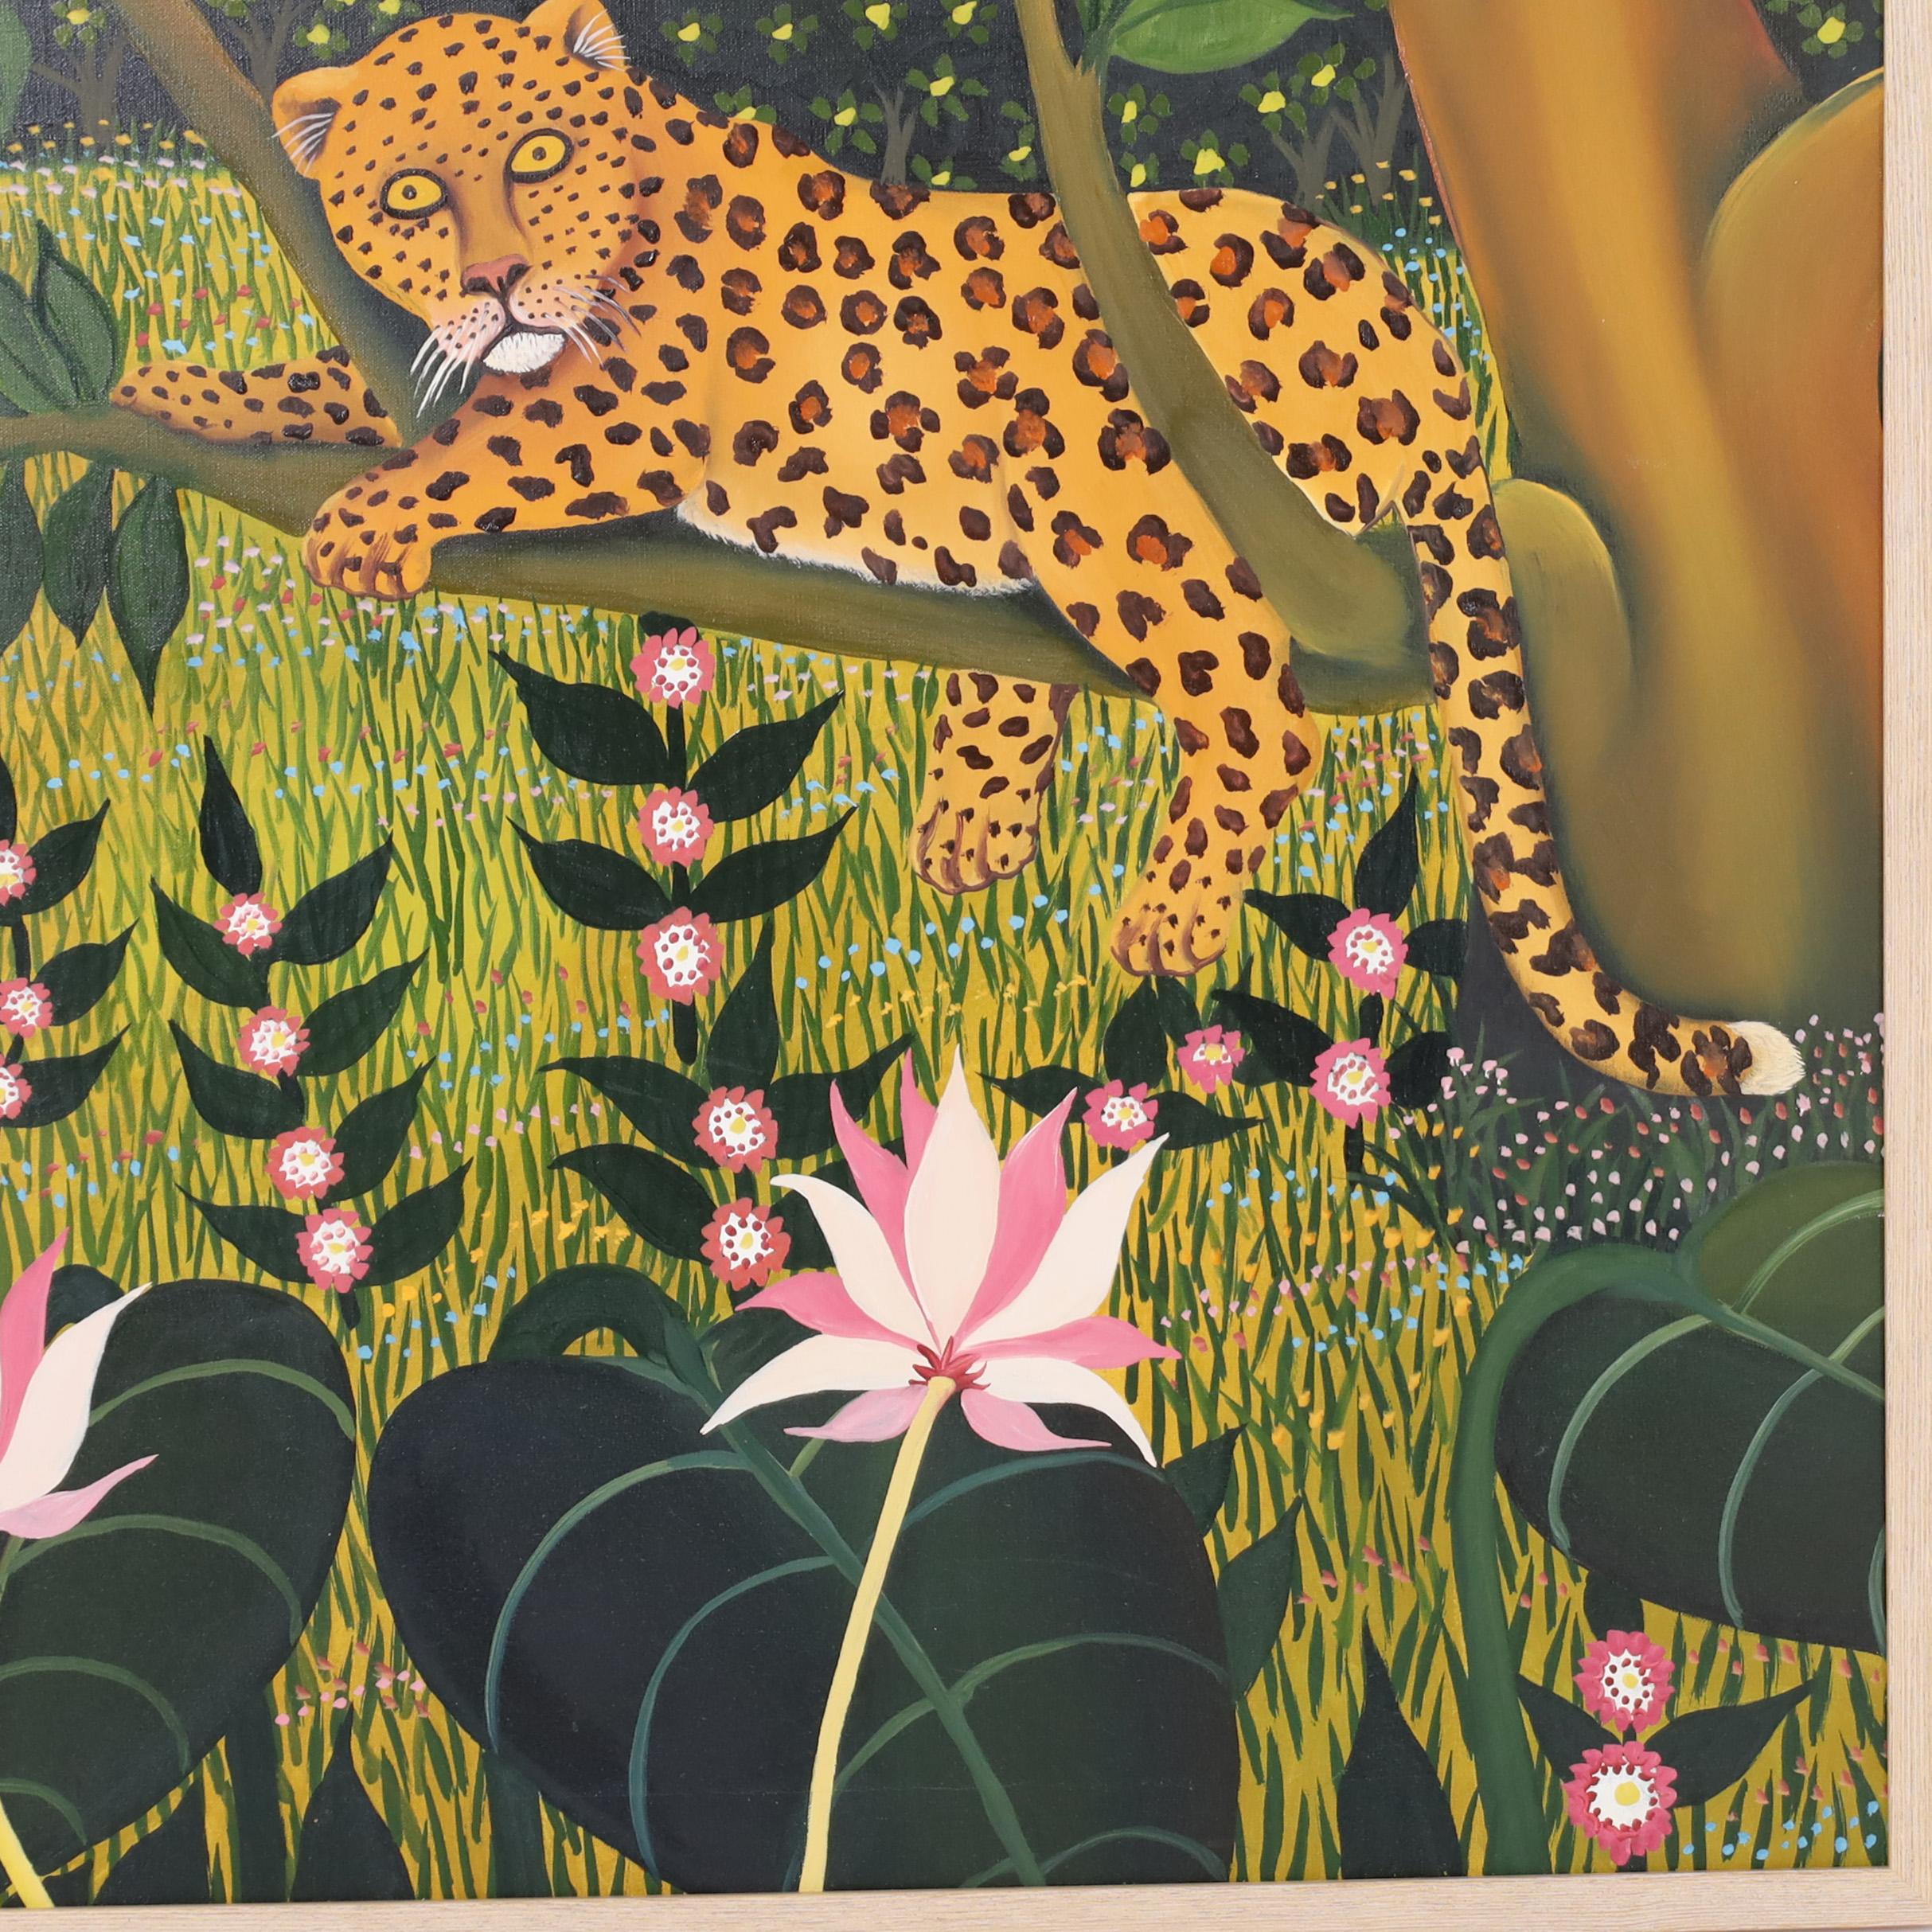 Striking vintage acrylic painting on canvas of a reclining leopard and parrot in a jungle landscape with tropical plants, executed in a distinctive naive style. Signed 